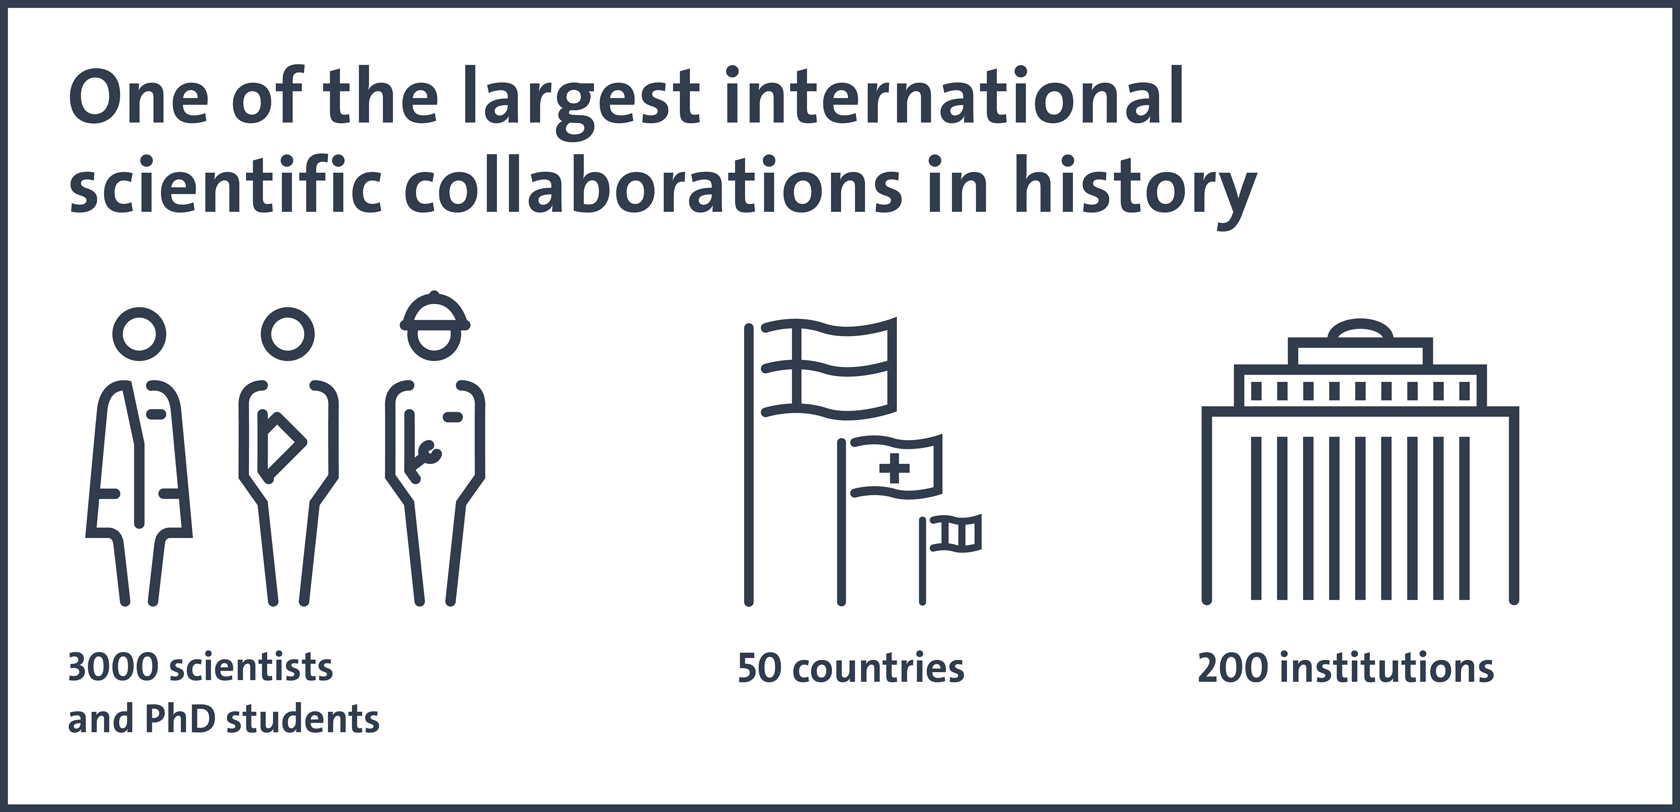 One of the largest international scientific collaborations in history: 3000 scientists and PhD students, 50 countries and 200 institutions